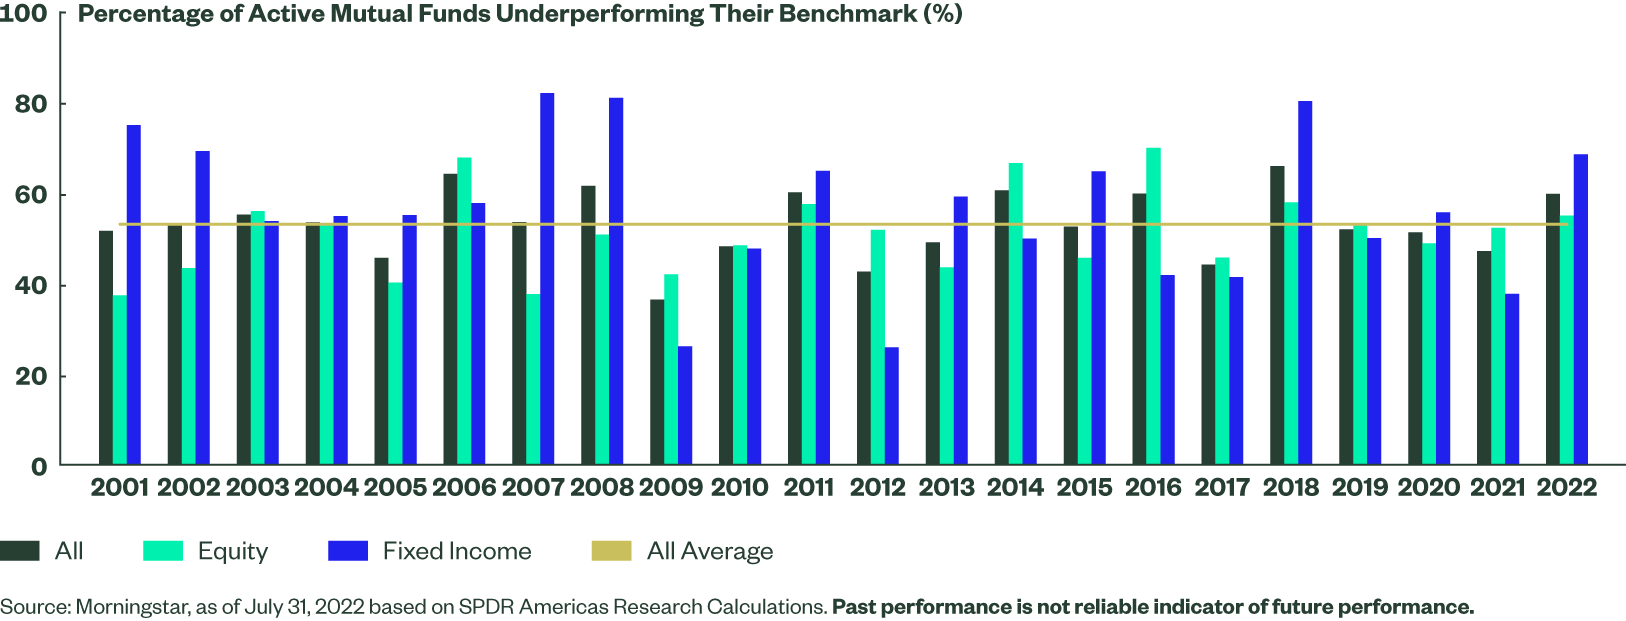 Percentage of Active Mutual Funds Underperforming their Benchmark in 2022